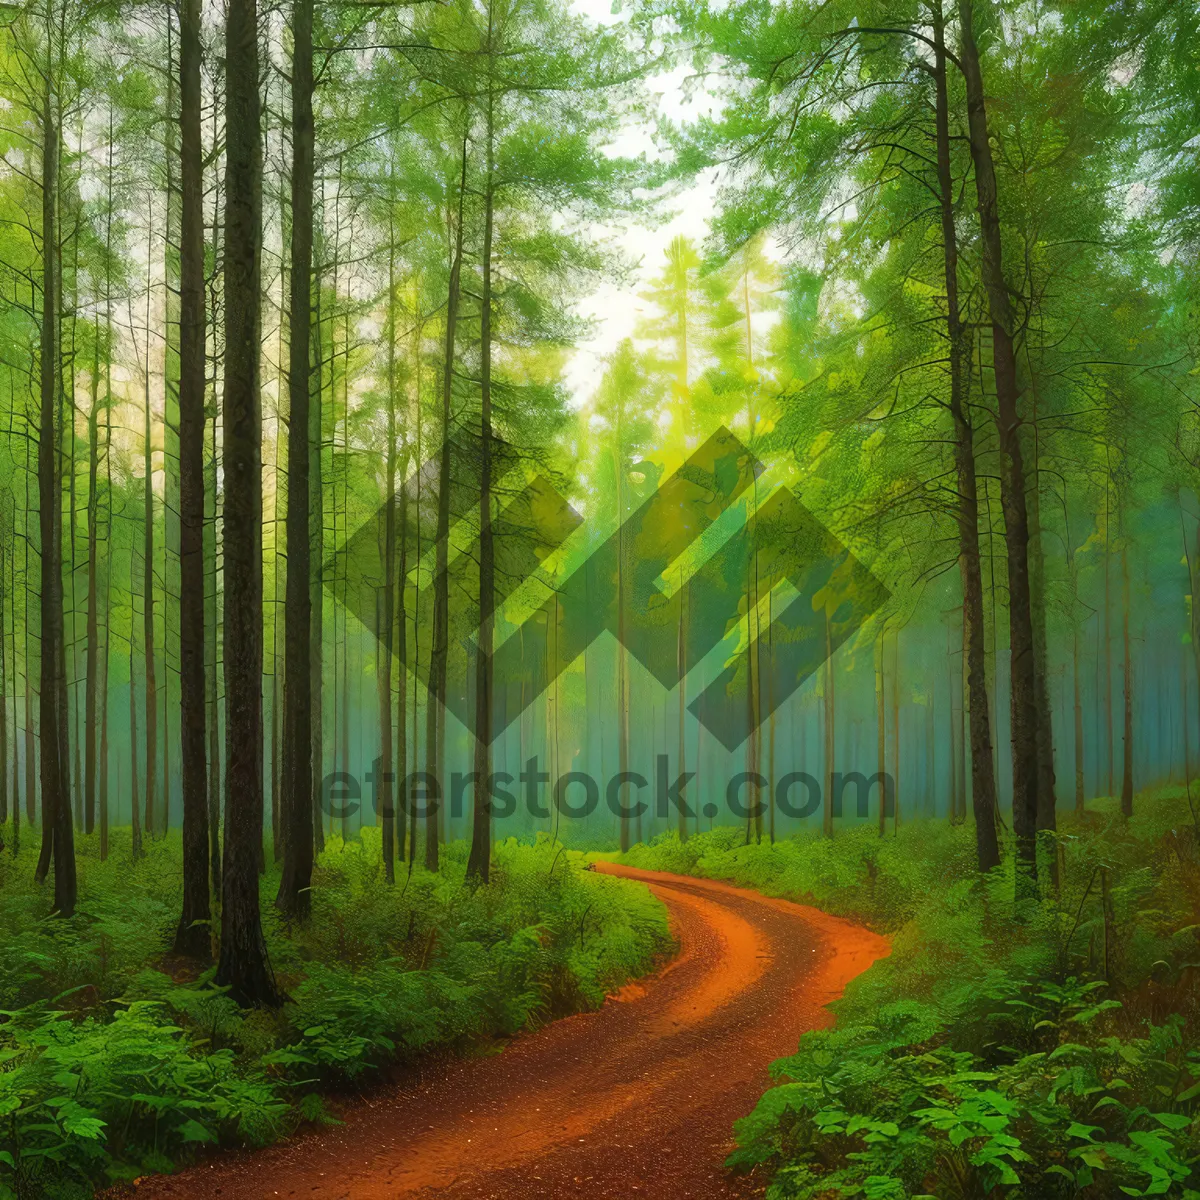 Picture of Seasonal Pathway Through Woodland Landscape